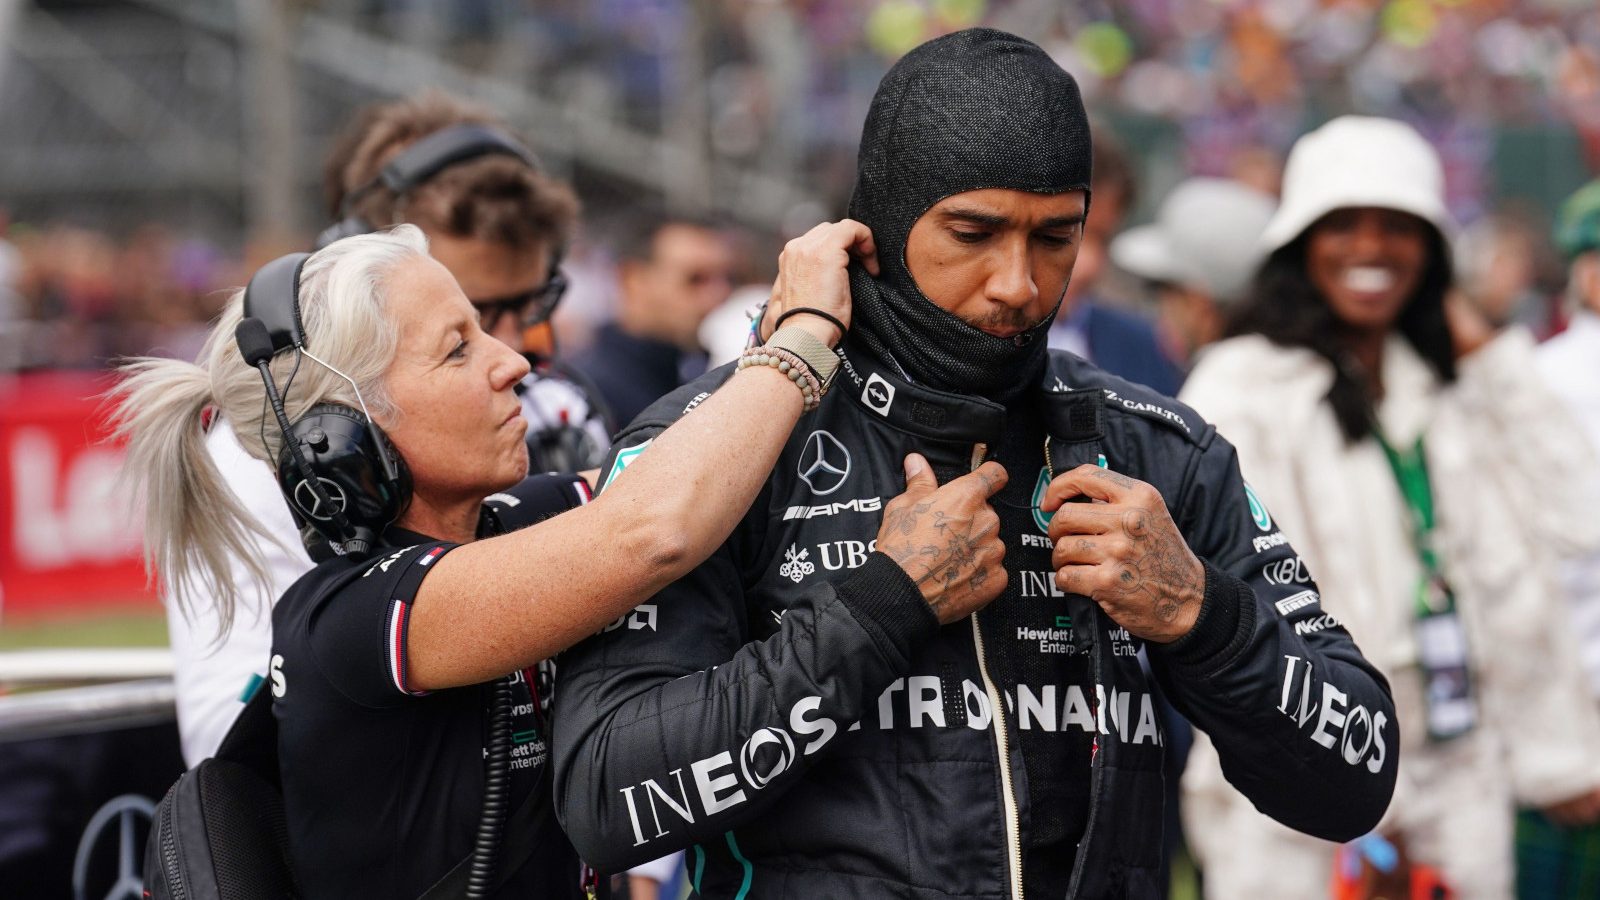 Angela Cullen assists Lewis Hamilton on the grid. Silverstone July 2022